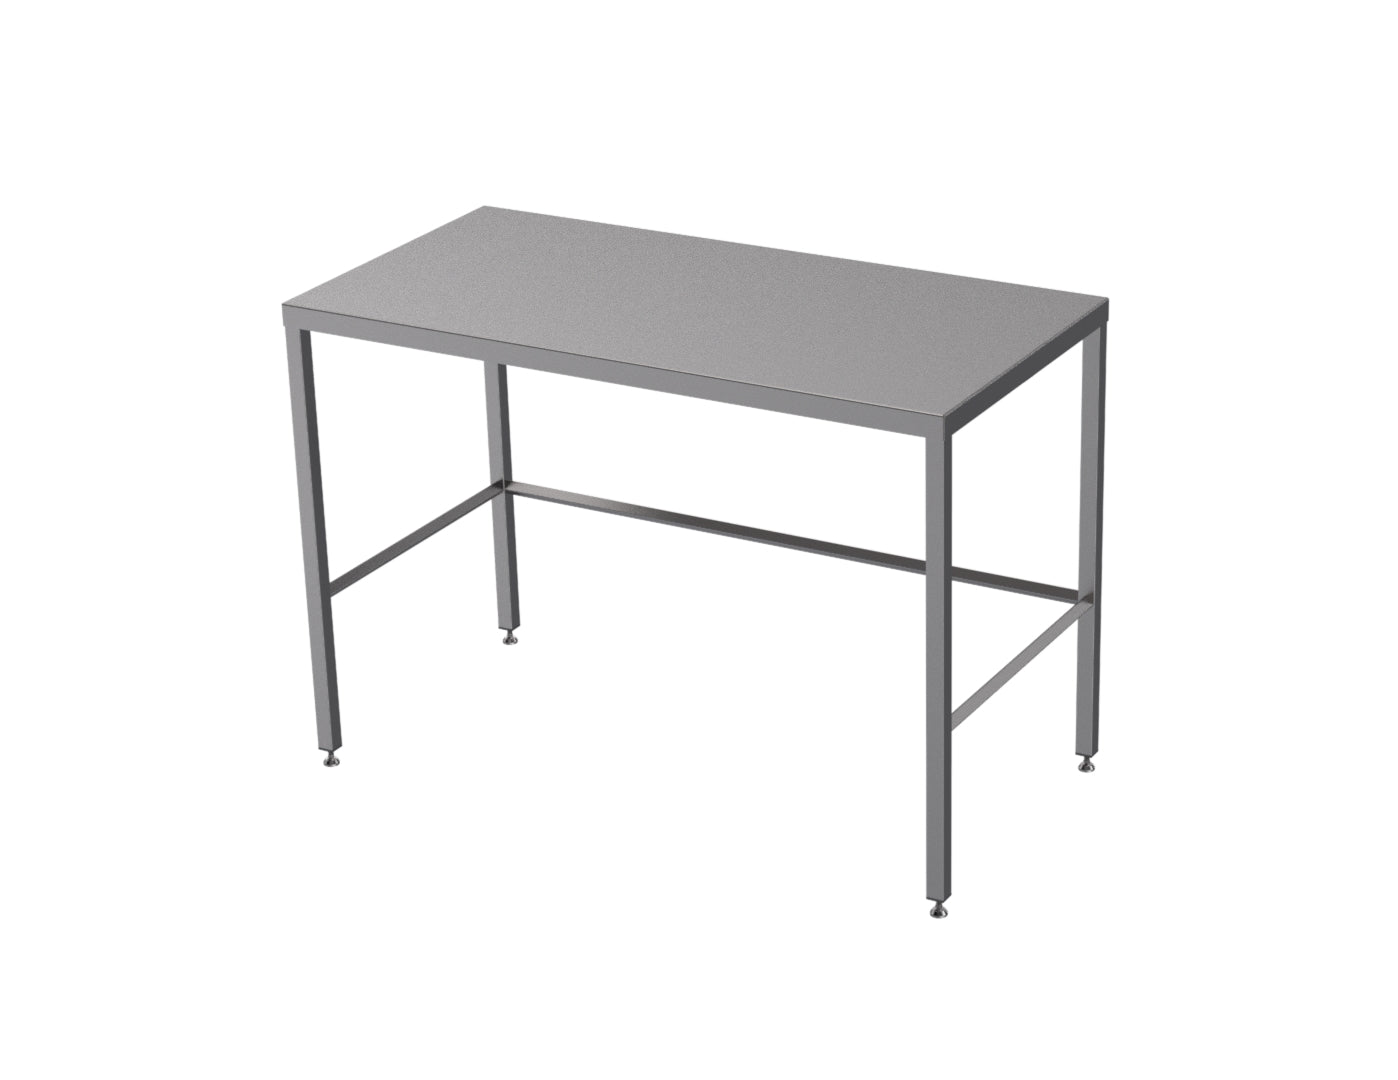 Stainless steel table with diamond rear tie bar